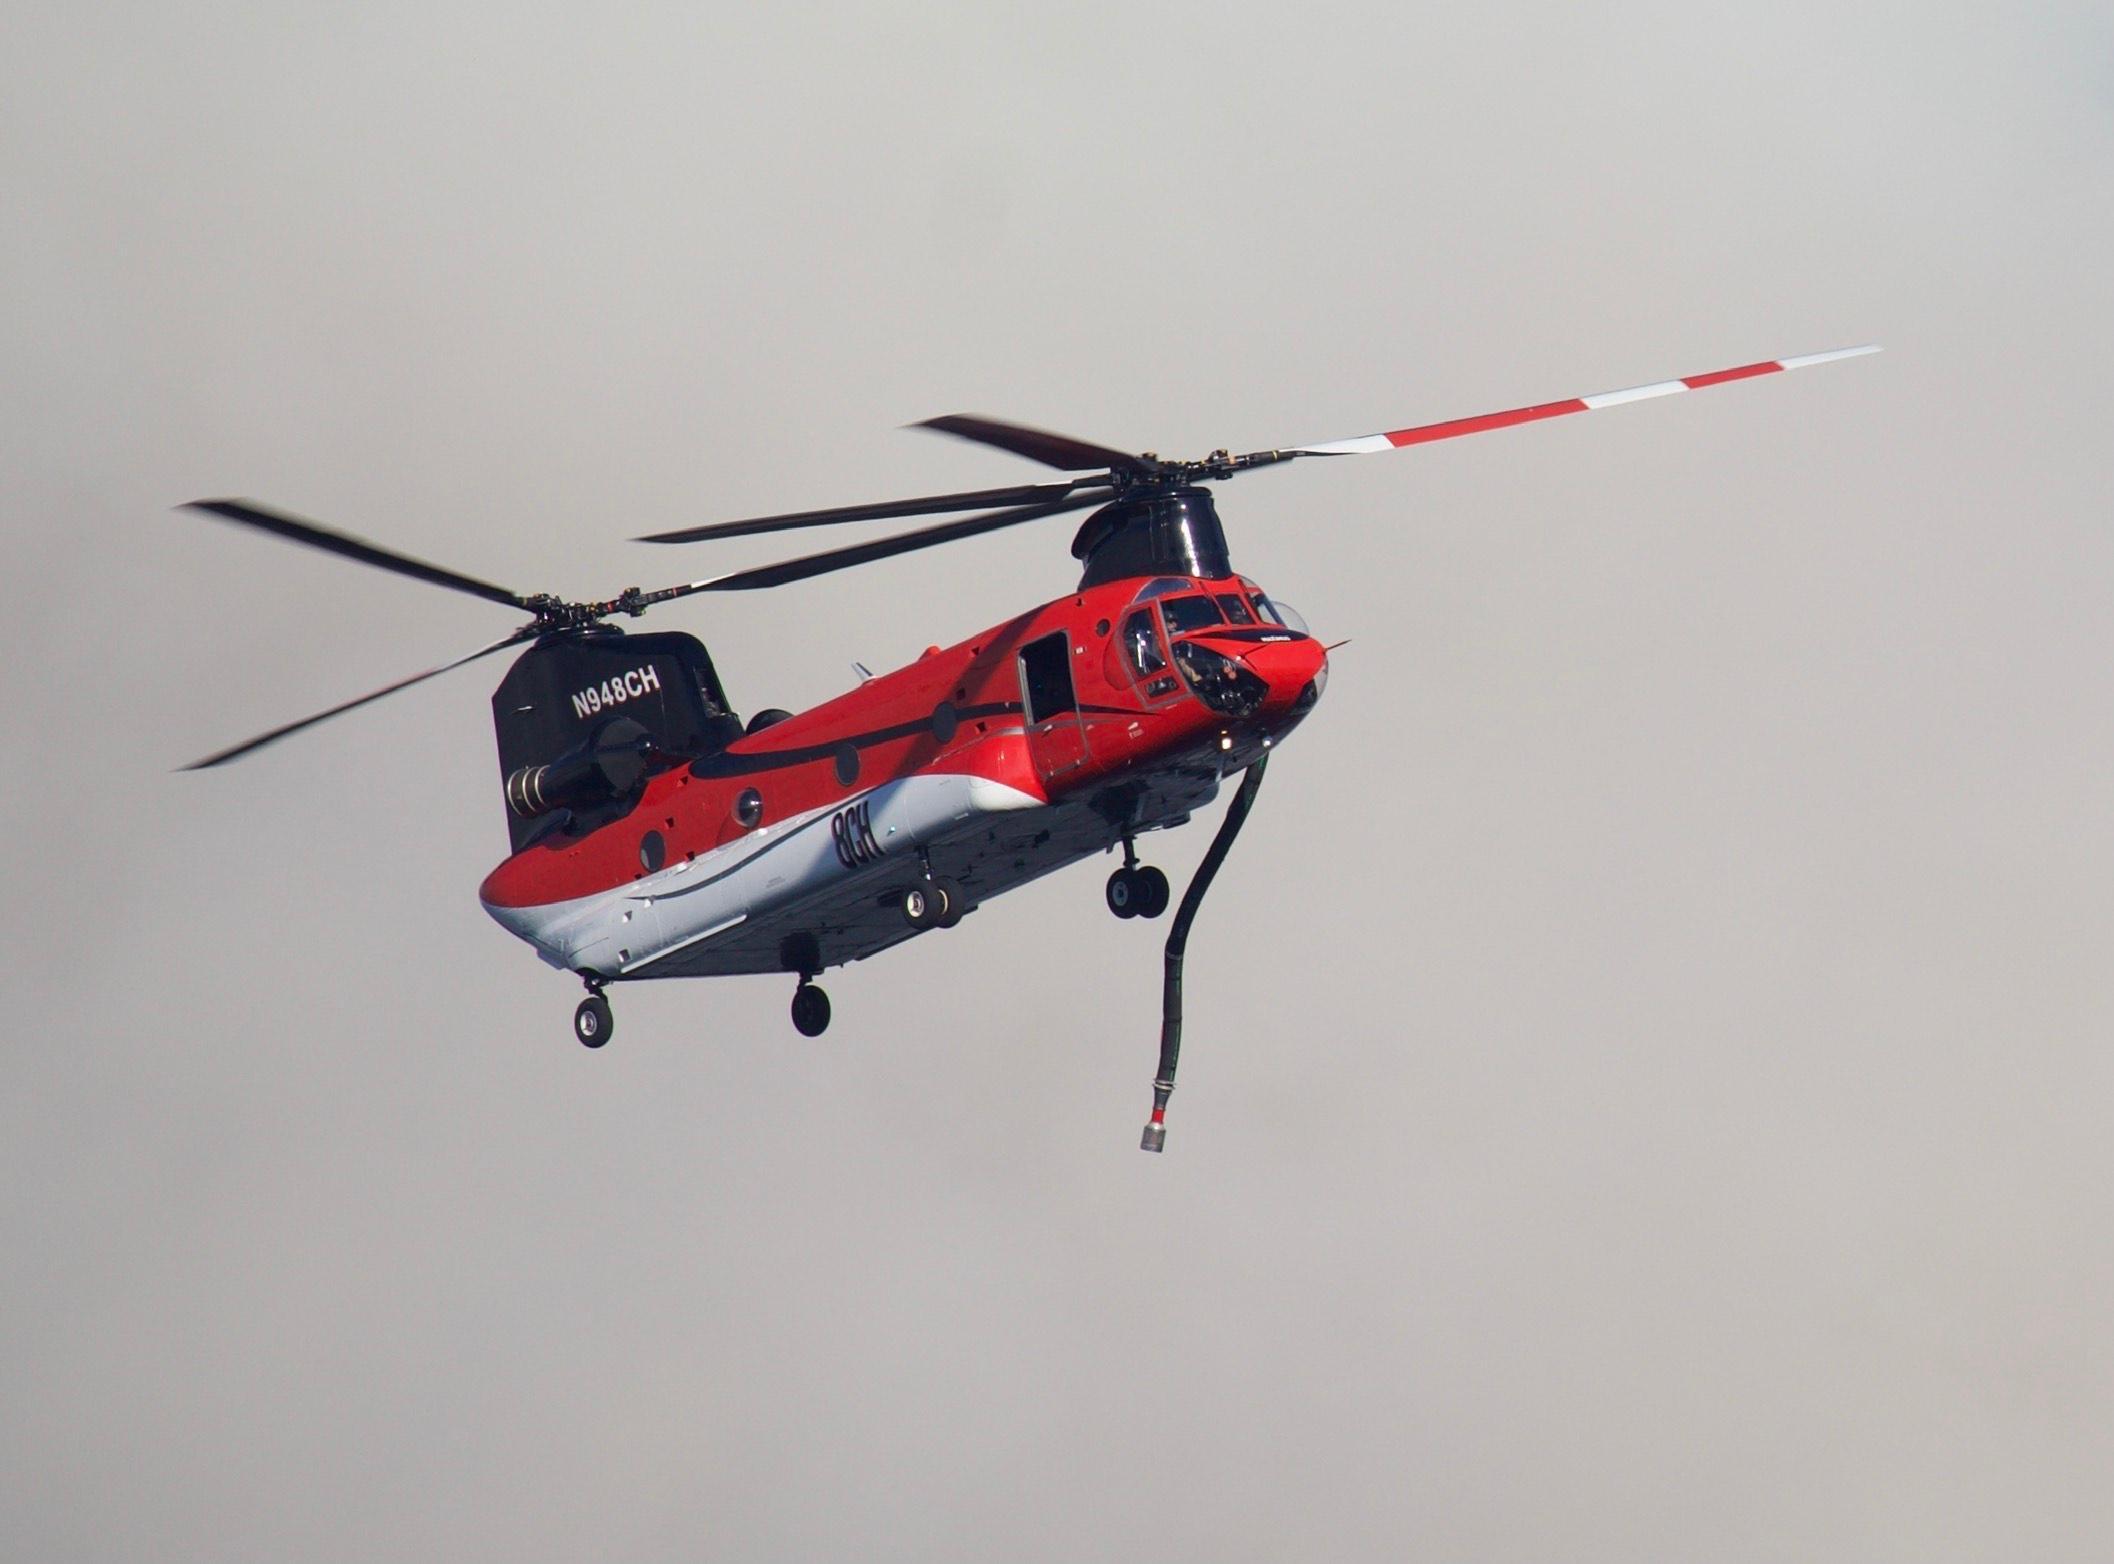 A red and white helicopter with two propellers flying in a smokey sky